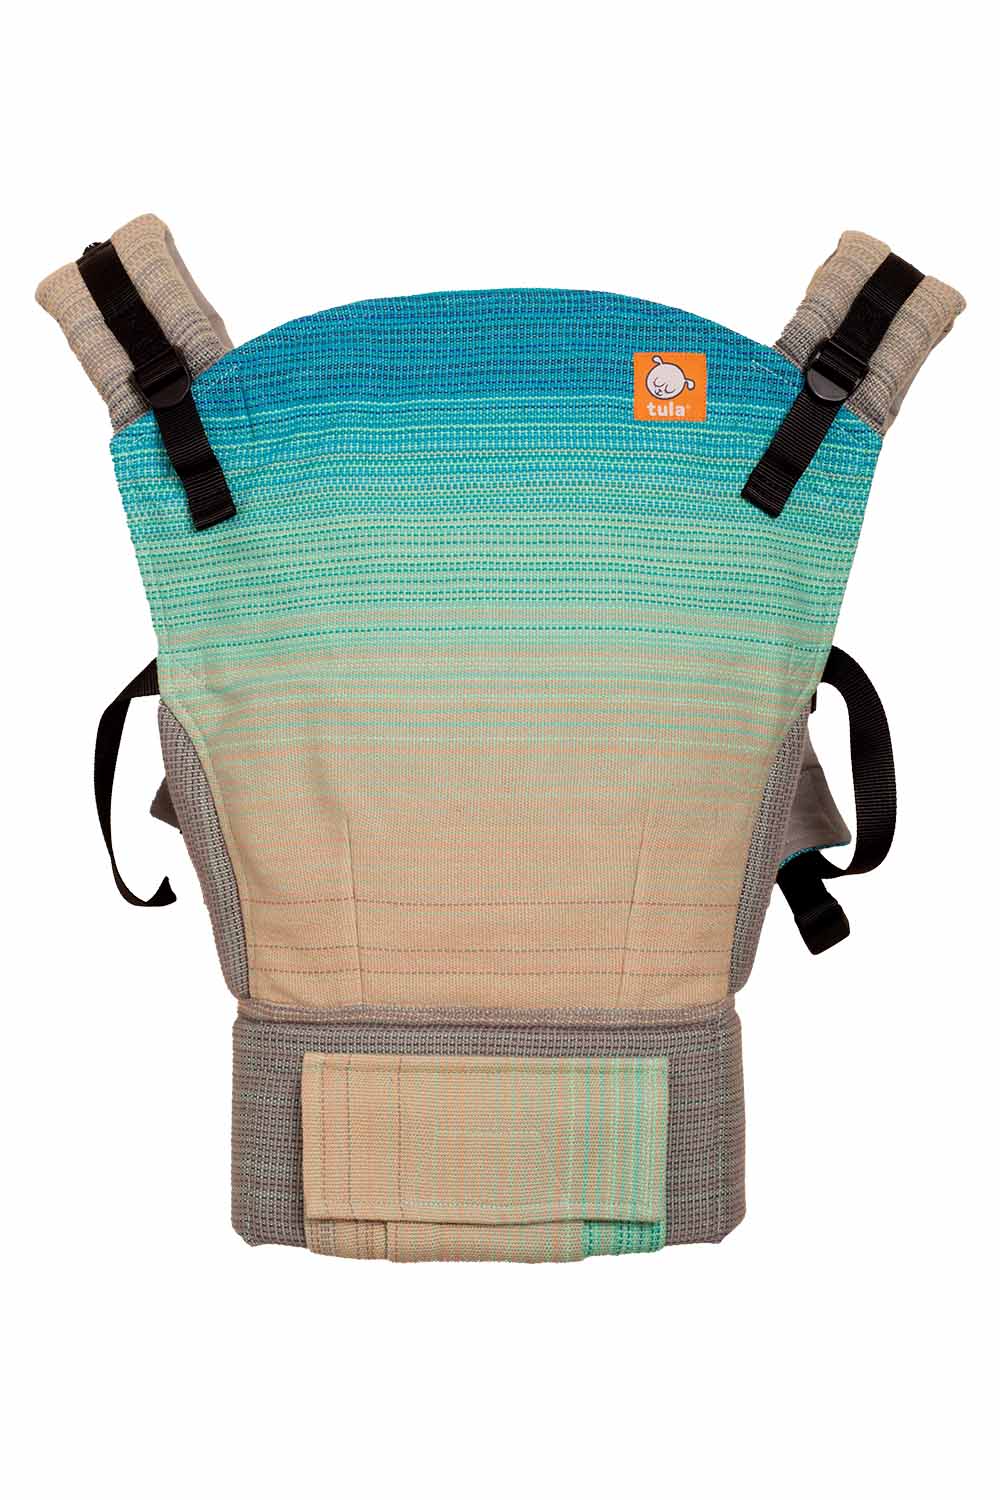 Longest Day of the Year - Signature Handwoven Standard Baby Carrier